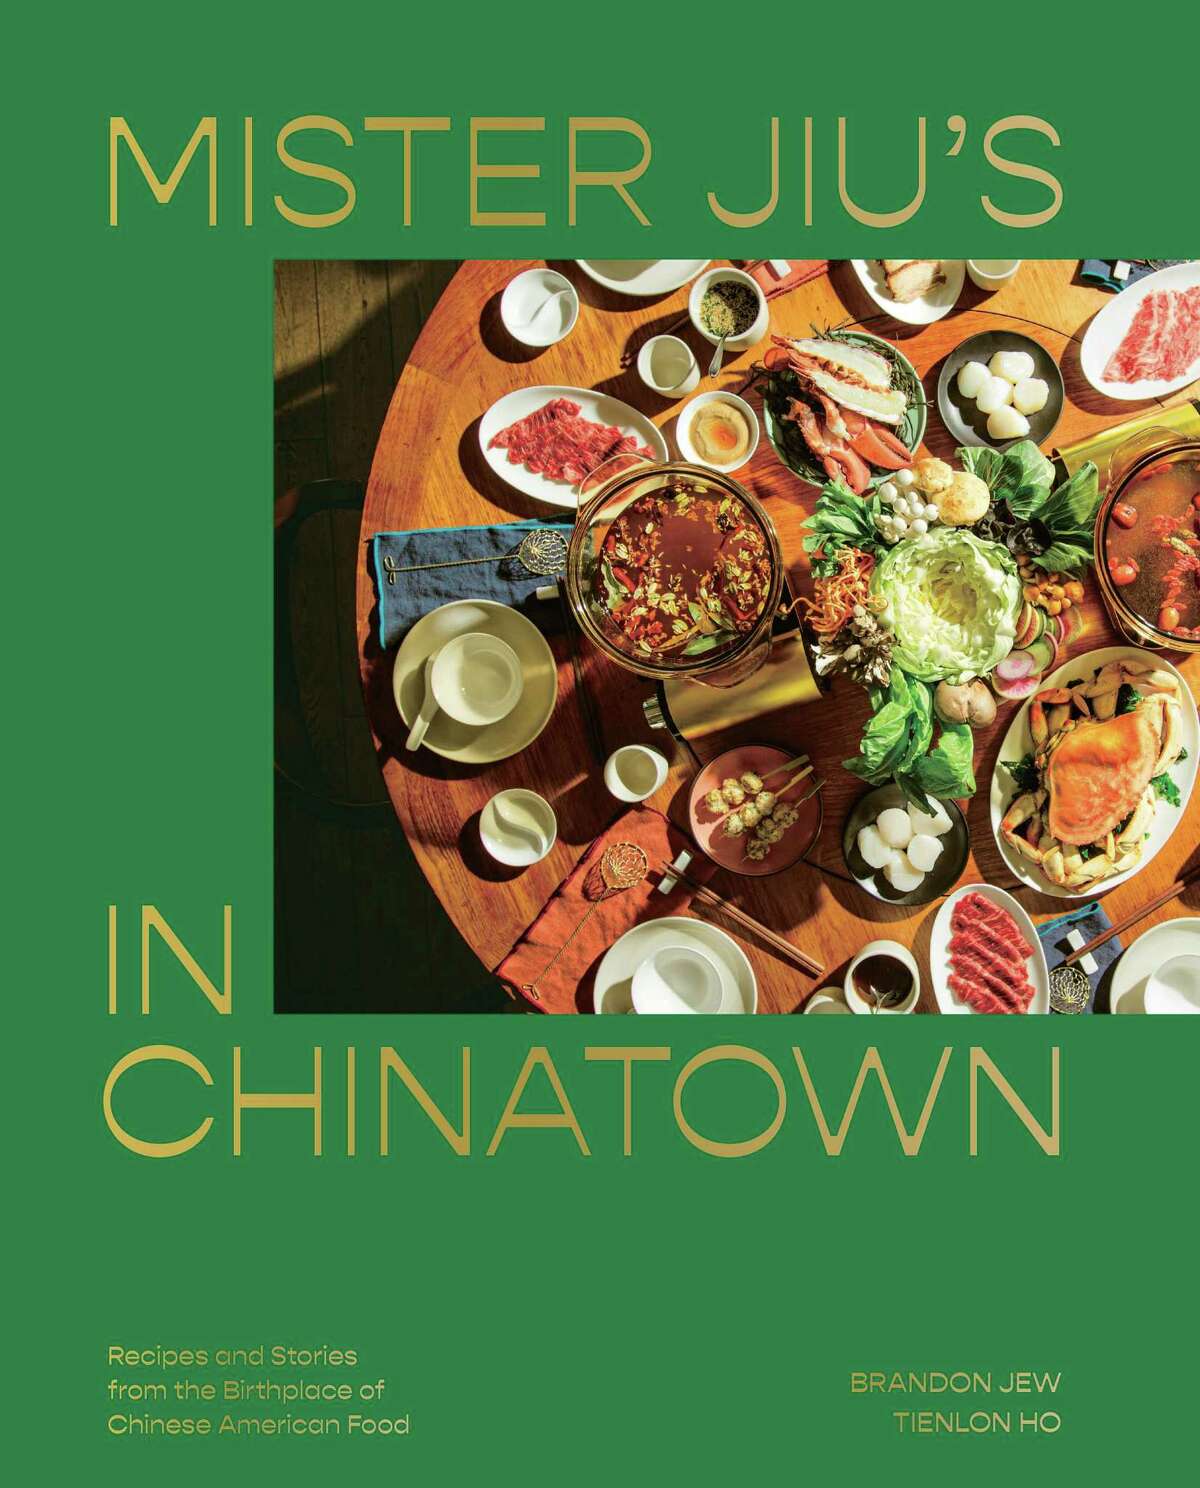 The cover of "Mister Jiu's in Chinatown: Recipes and Stories from the Birthplace of Chinese American Food" by Brandon Jew and Tienlon Ho.